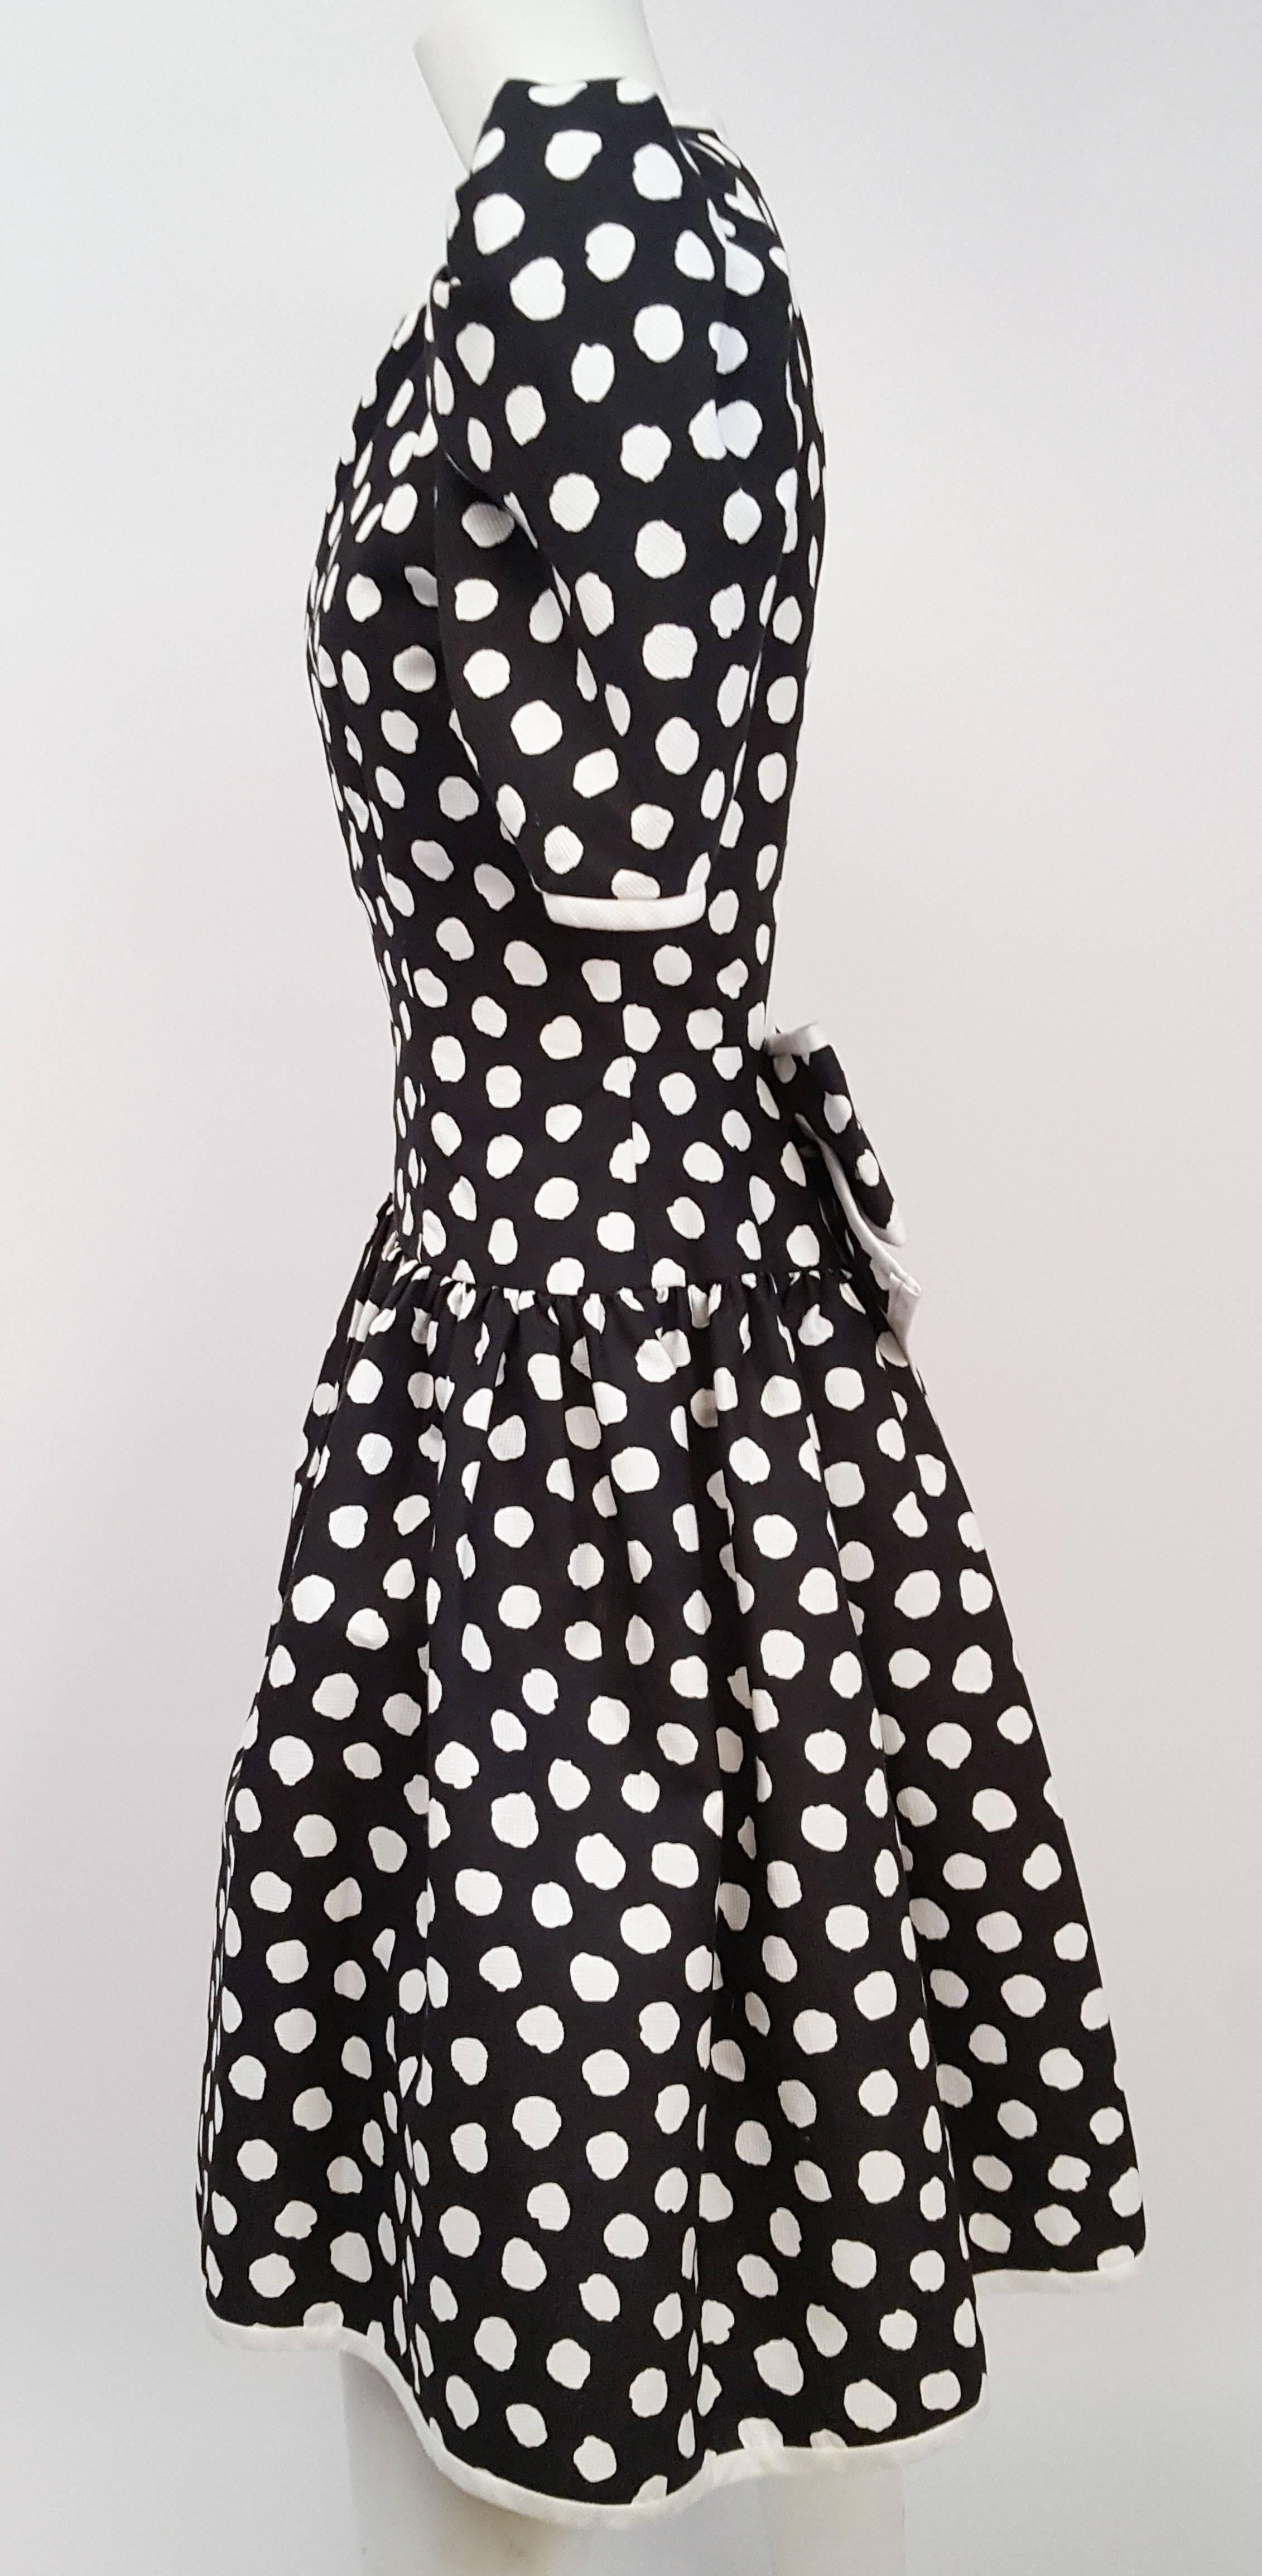 1980s Black & White Polka Dot Party Dress. Open back closes with snaps. Giant back bow detail. Shoulder puffs and skirt have built-in tulle for support. 